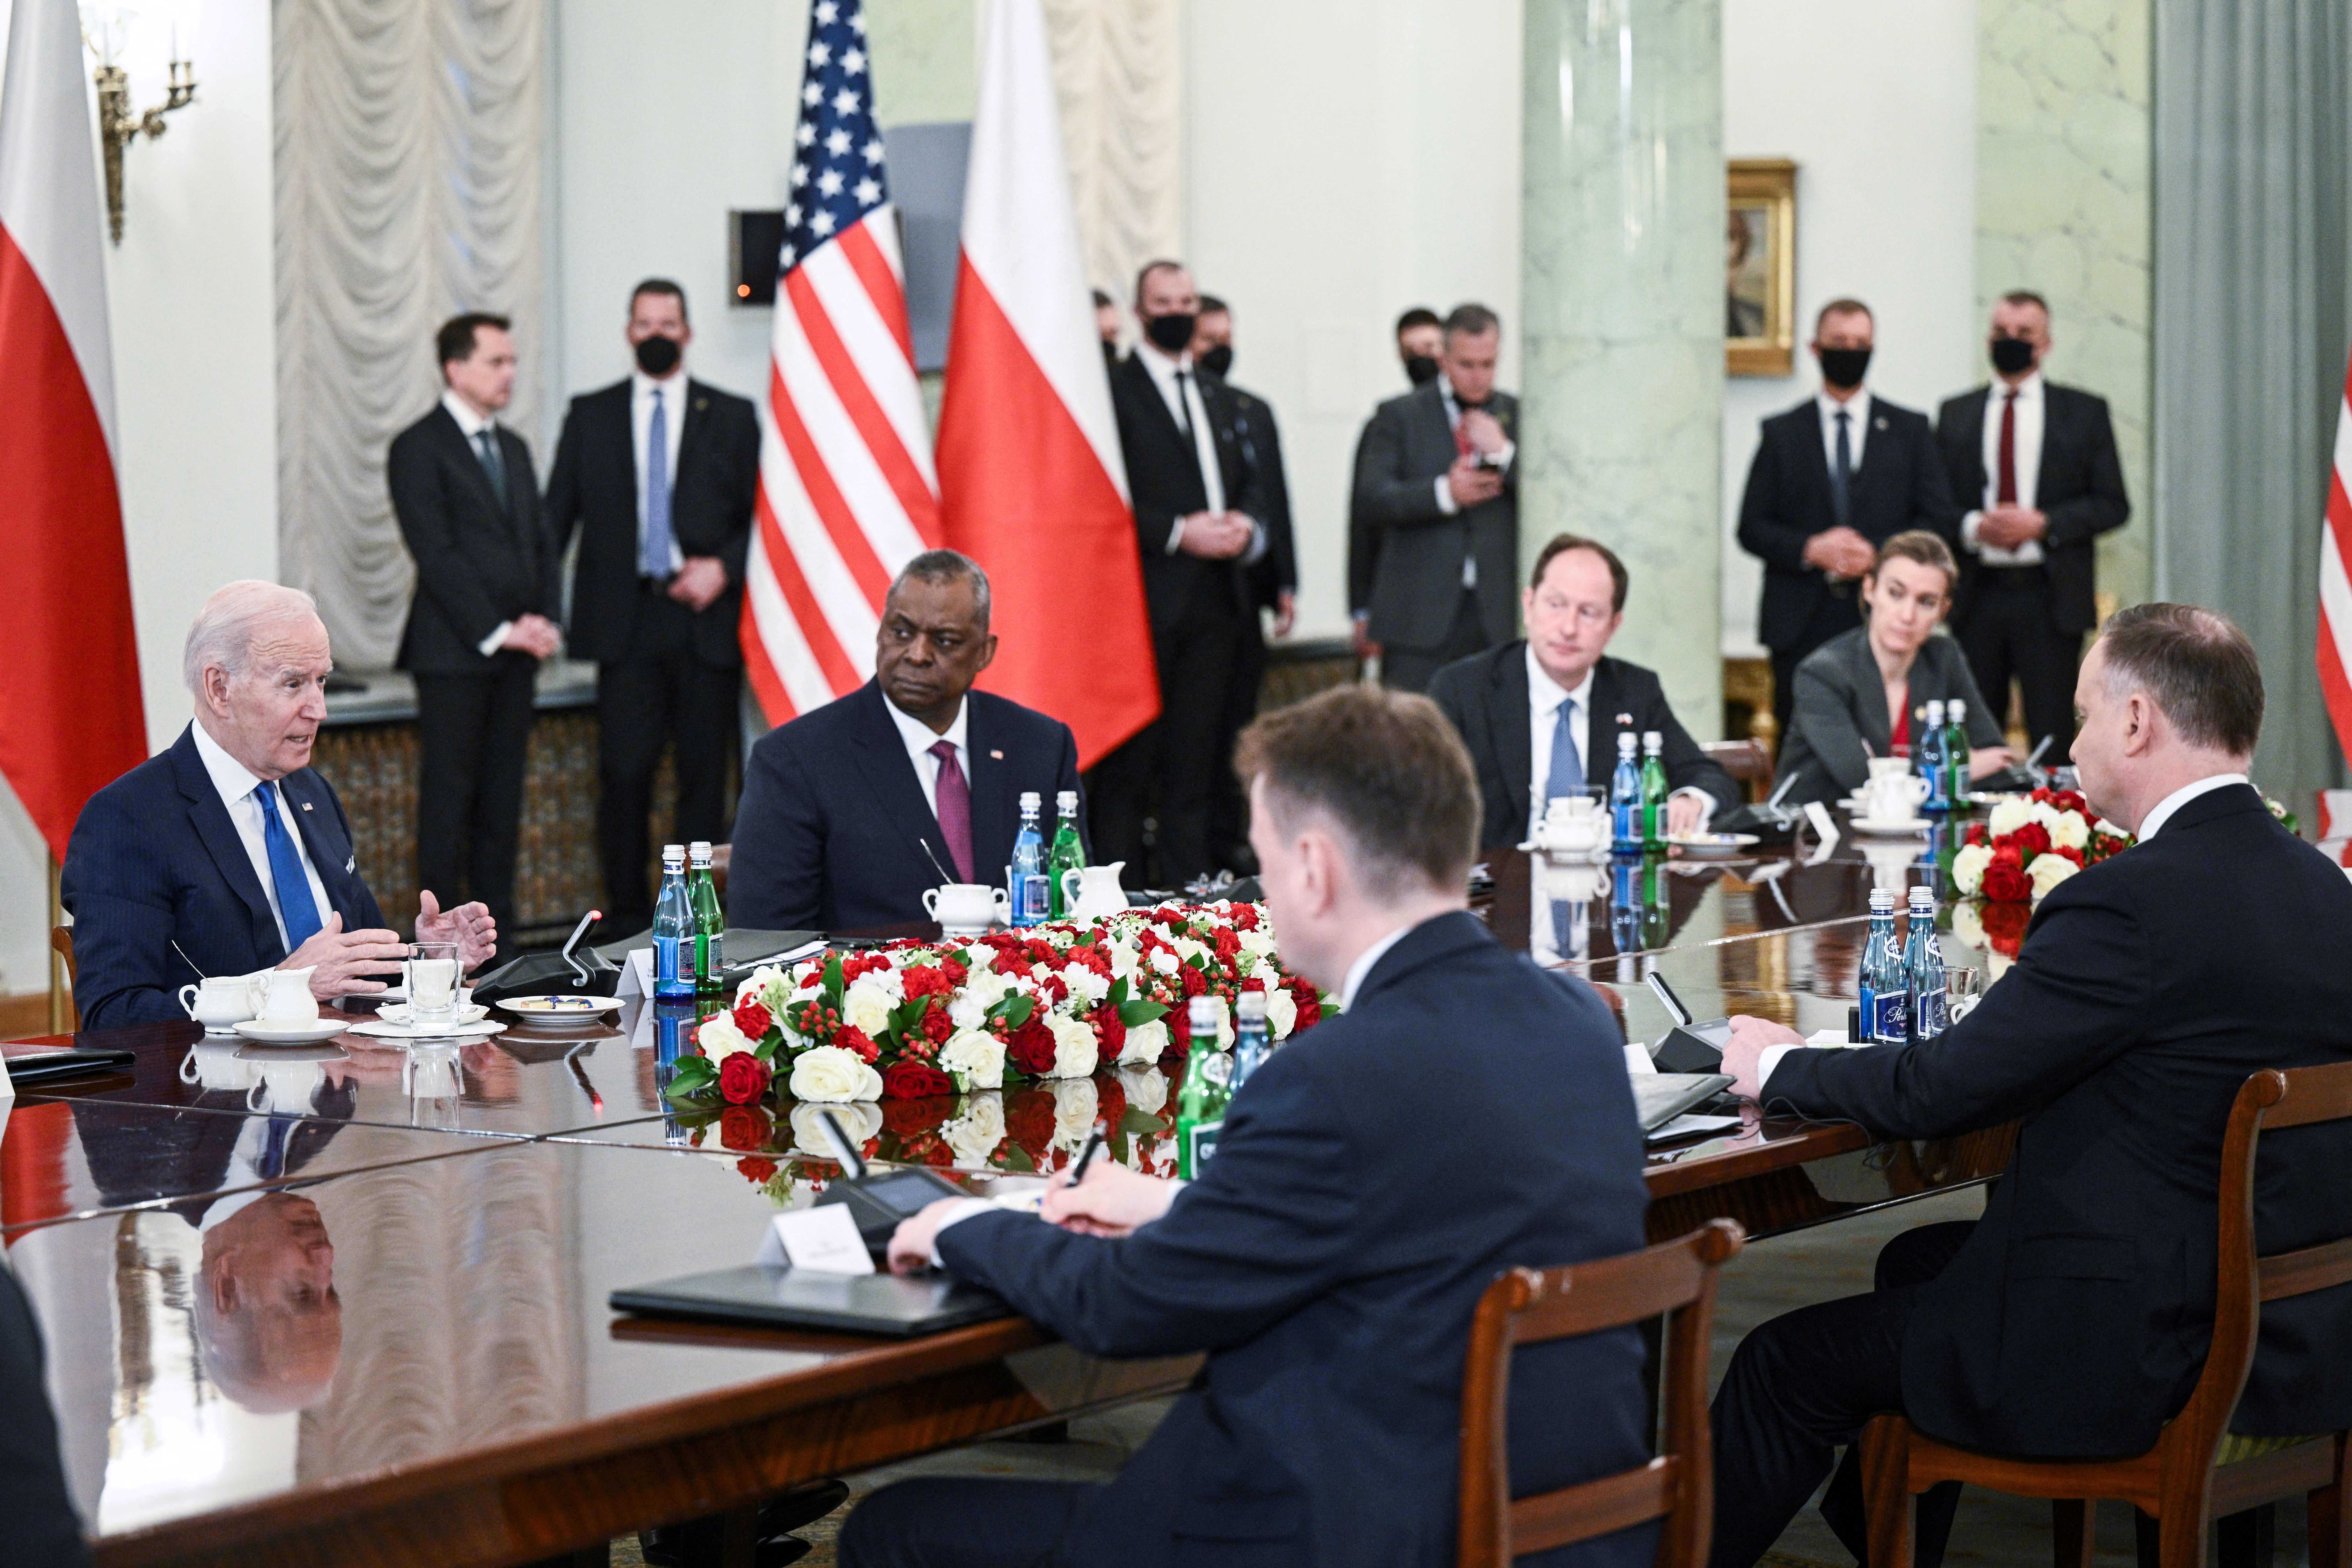 President Joe Biden (L) together with US Defence Secretary Lloyd Austin (2ndL) attends a meeting with Polish President Andrzej Duda (R) at the presidential palace in Warsaw on March 26, 2022. 